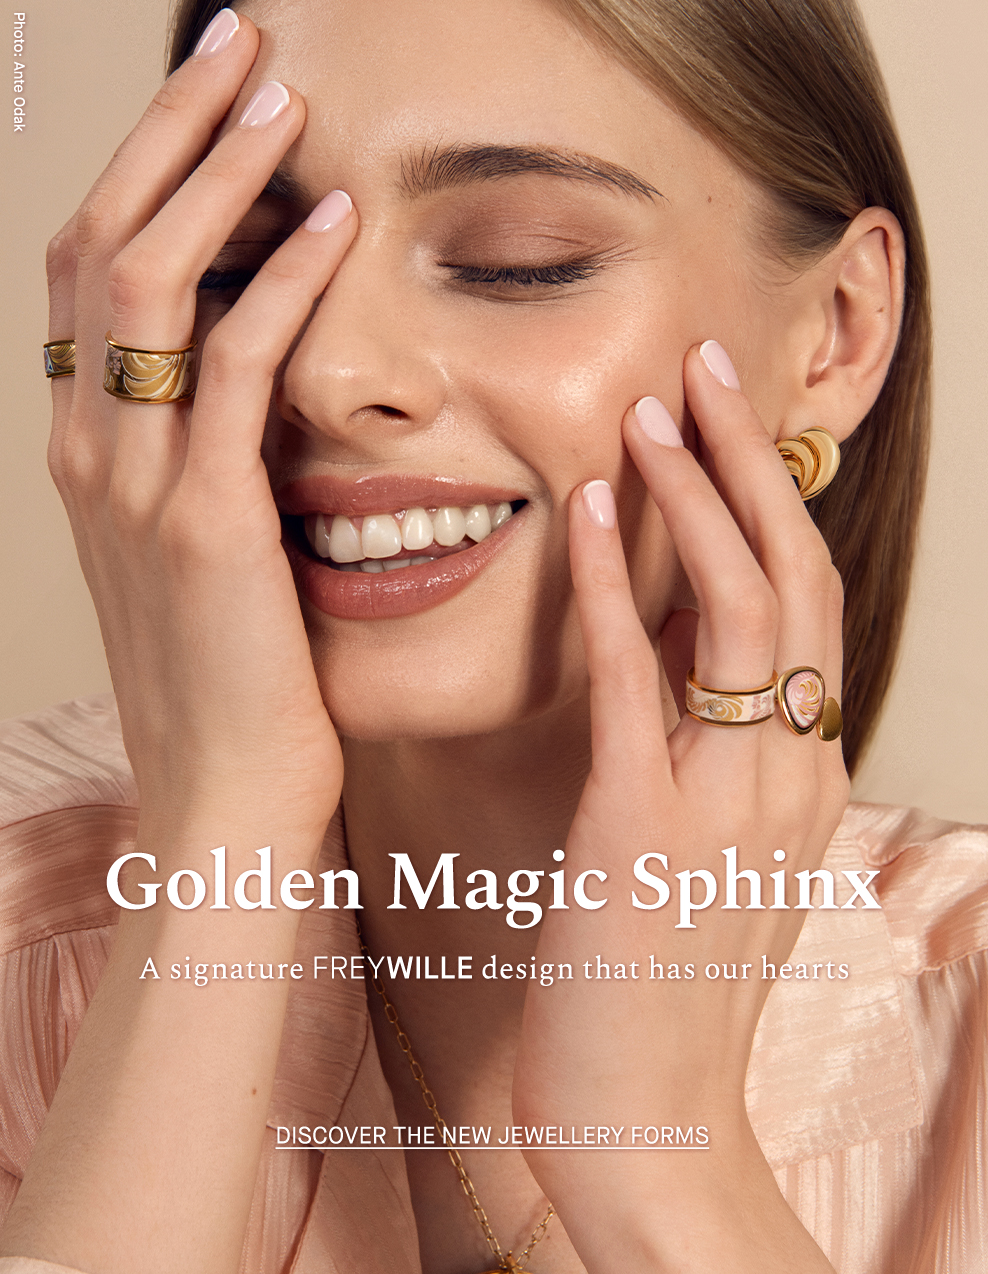 Click to explore our Magic Sphinx Collection